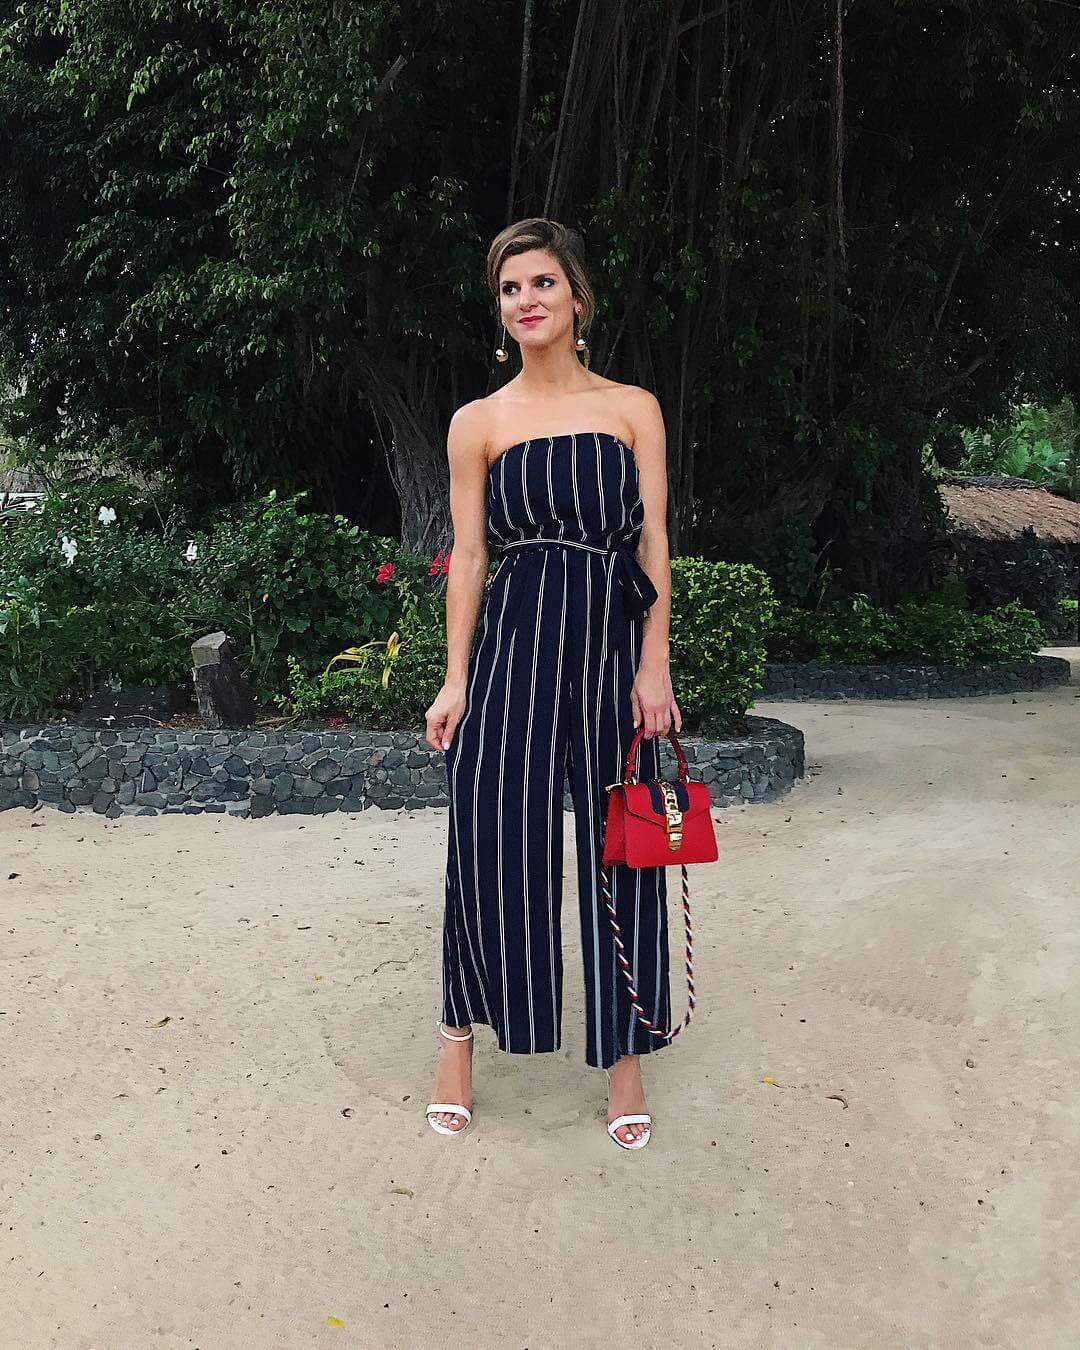 brighton keller wearing striped strapless jumpsuit with white sandals